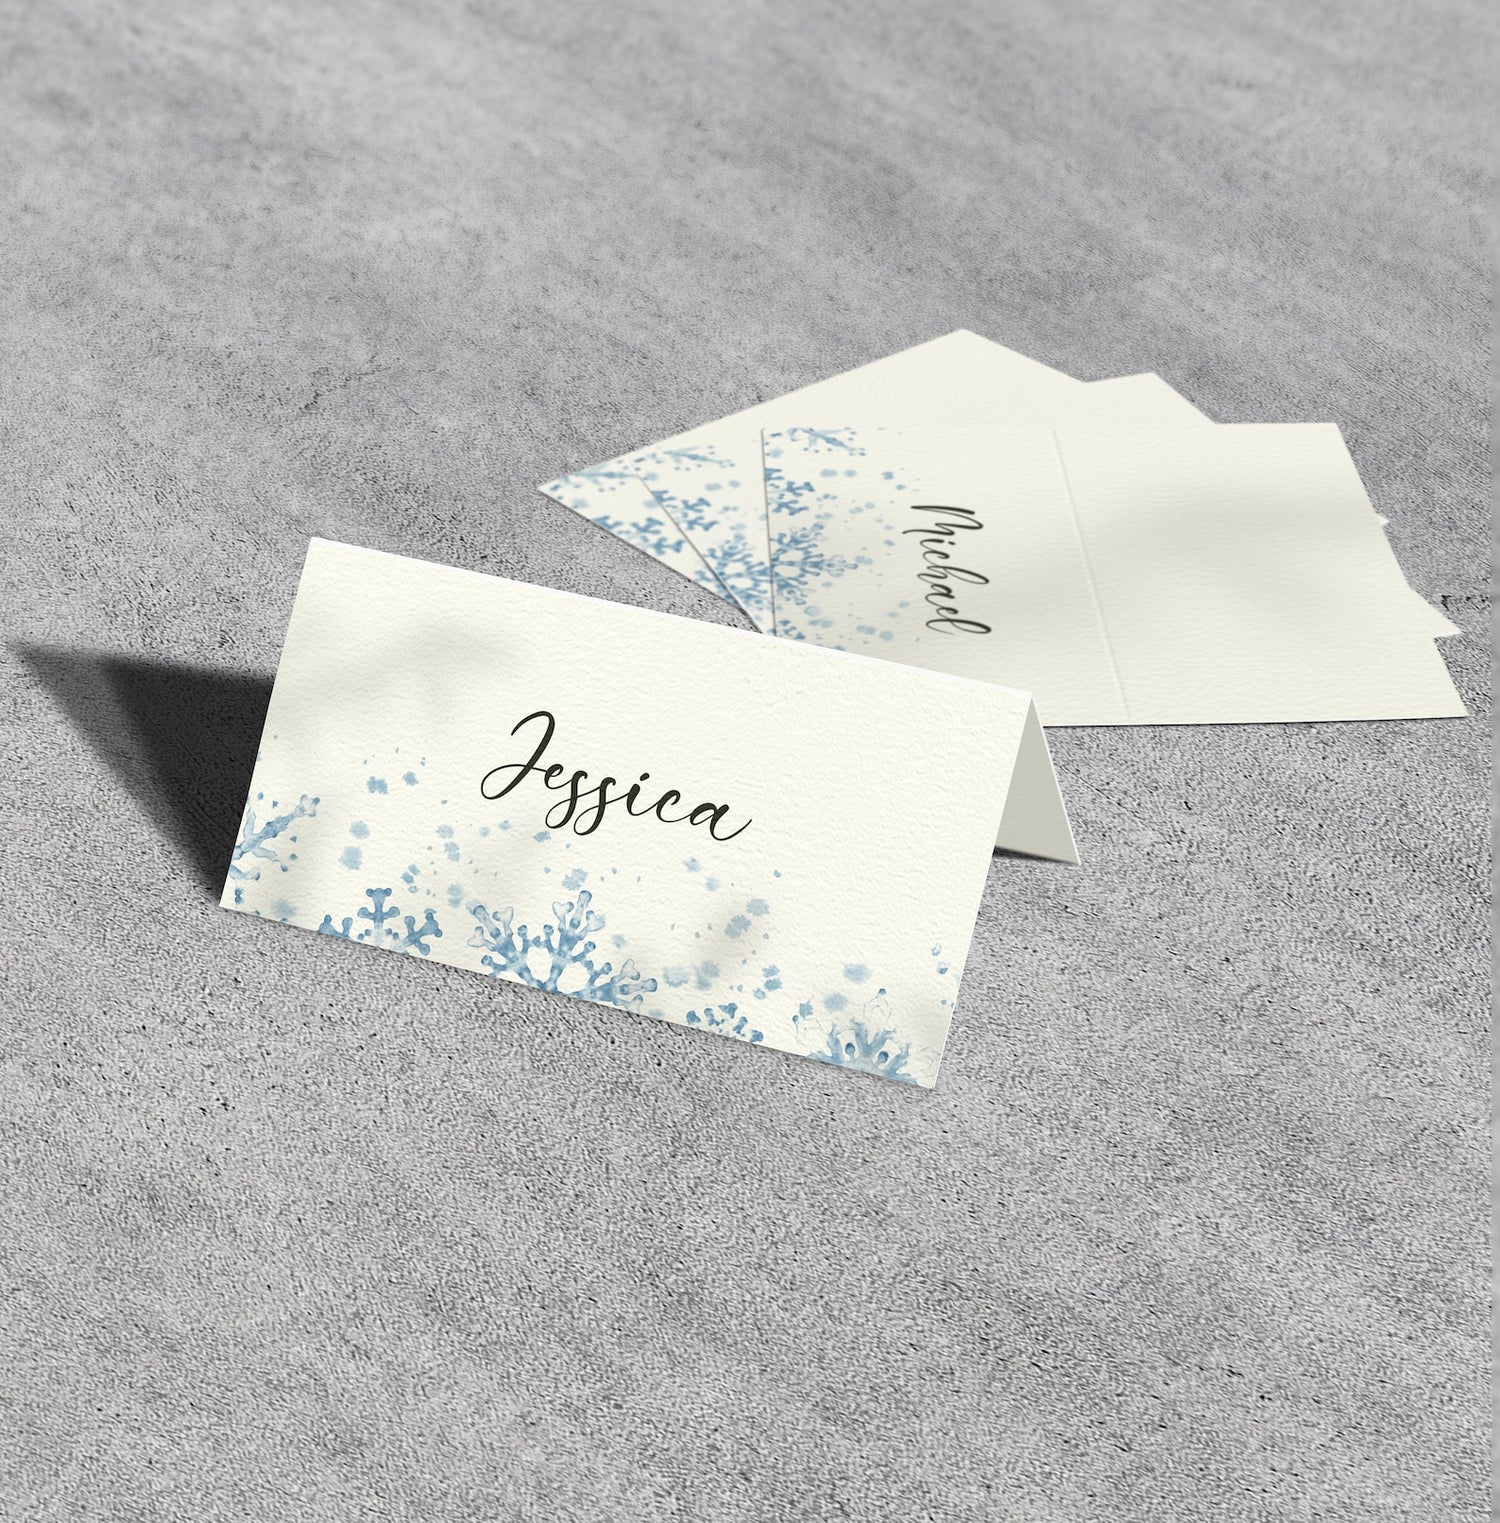 Winter Wedding Place Cards